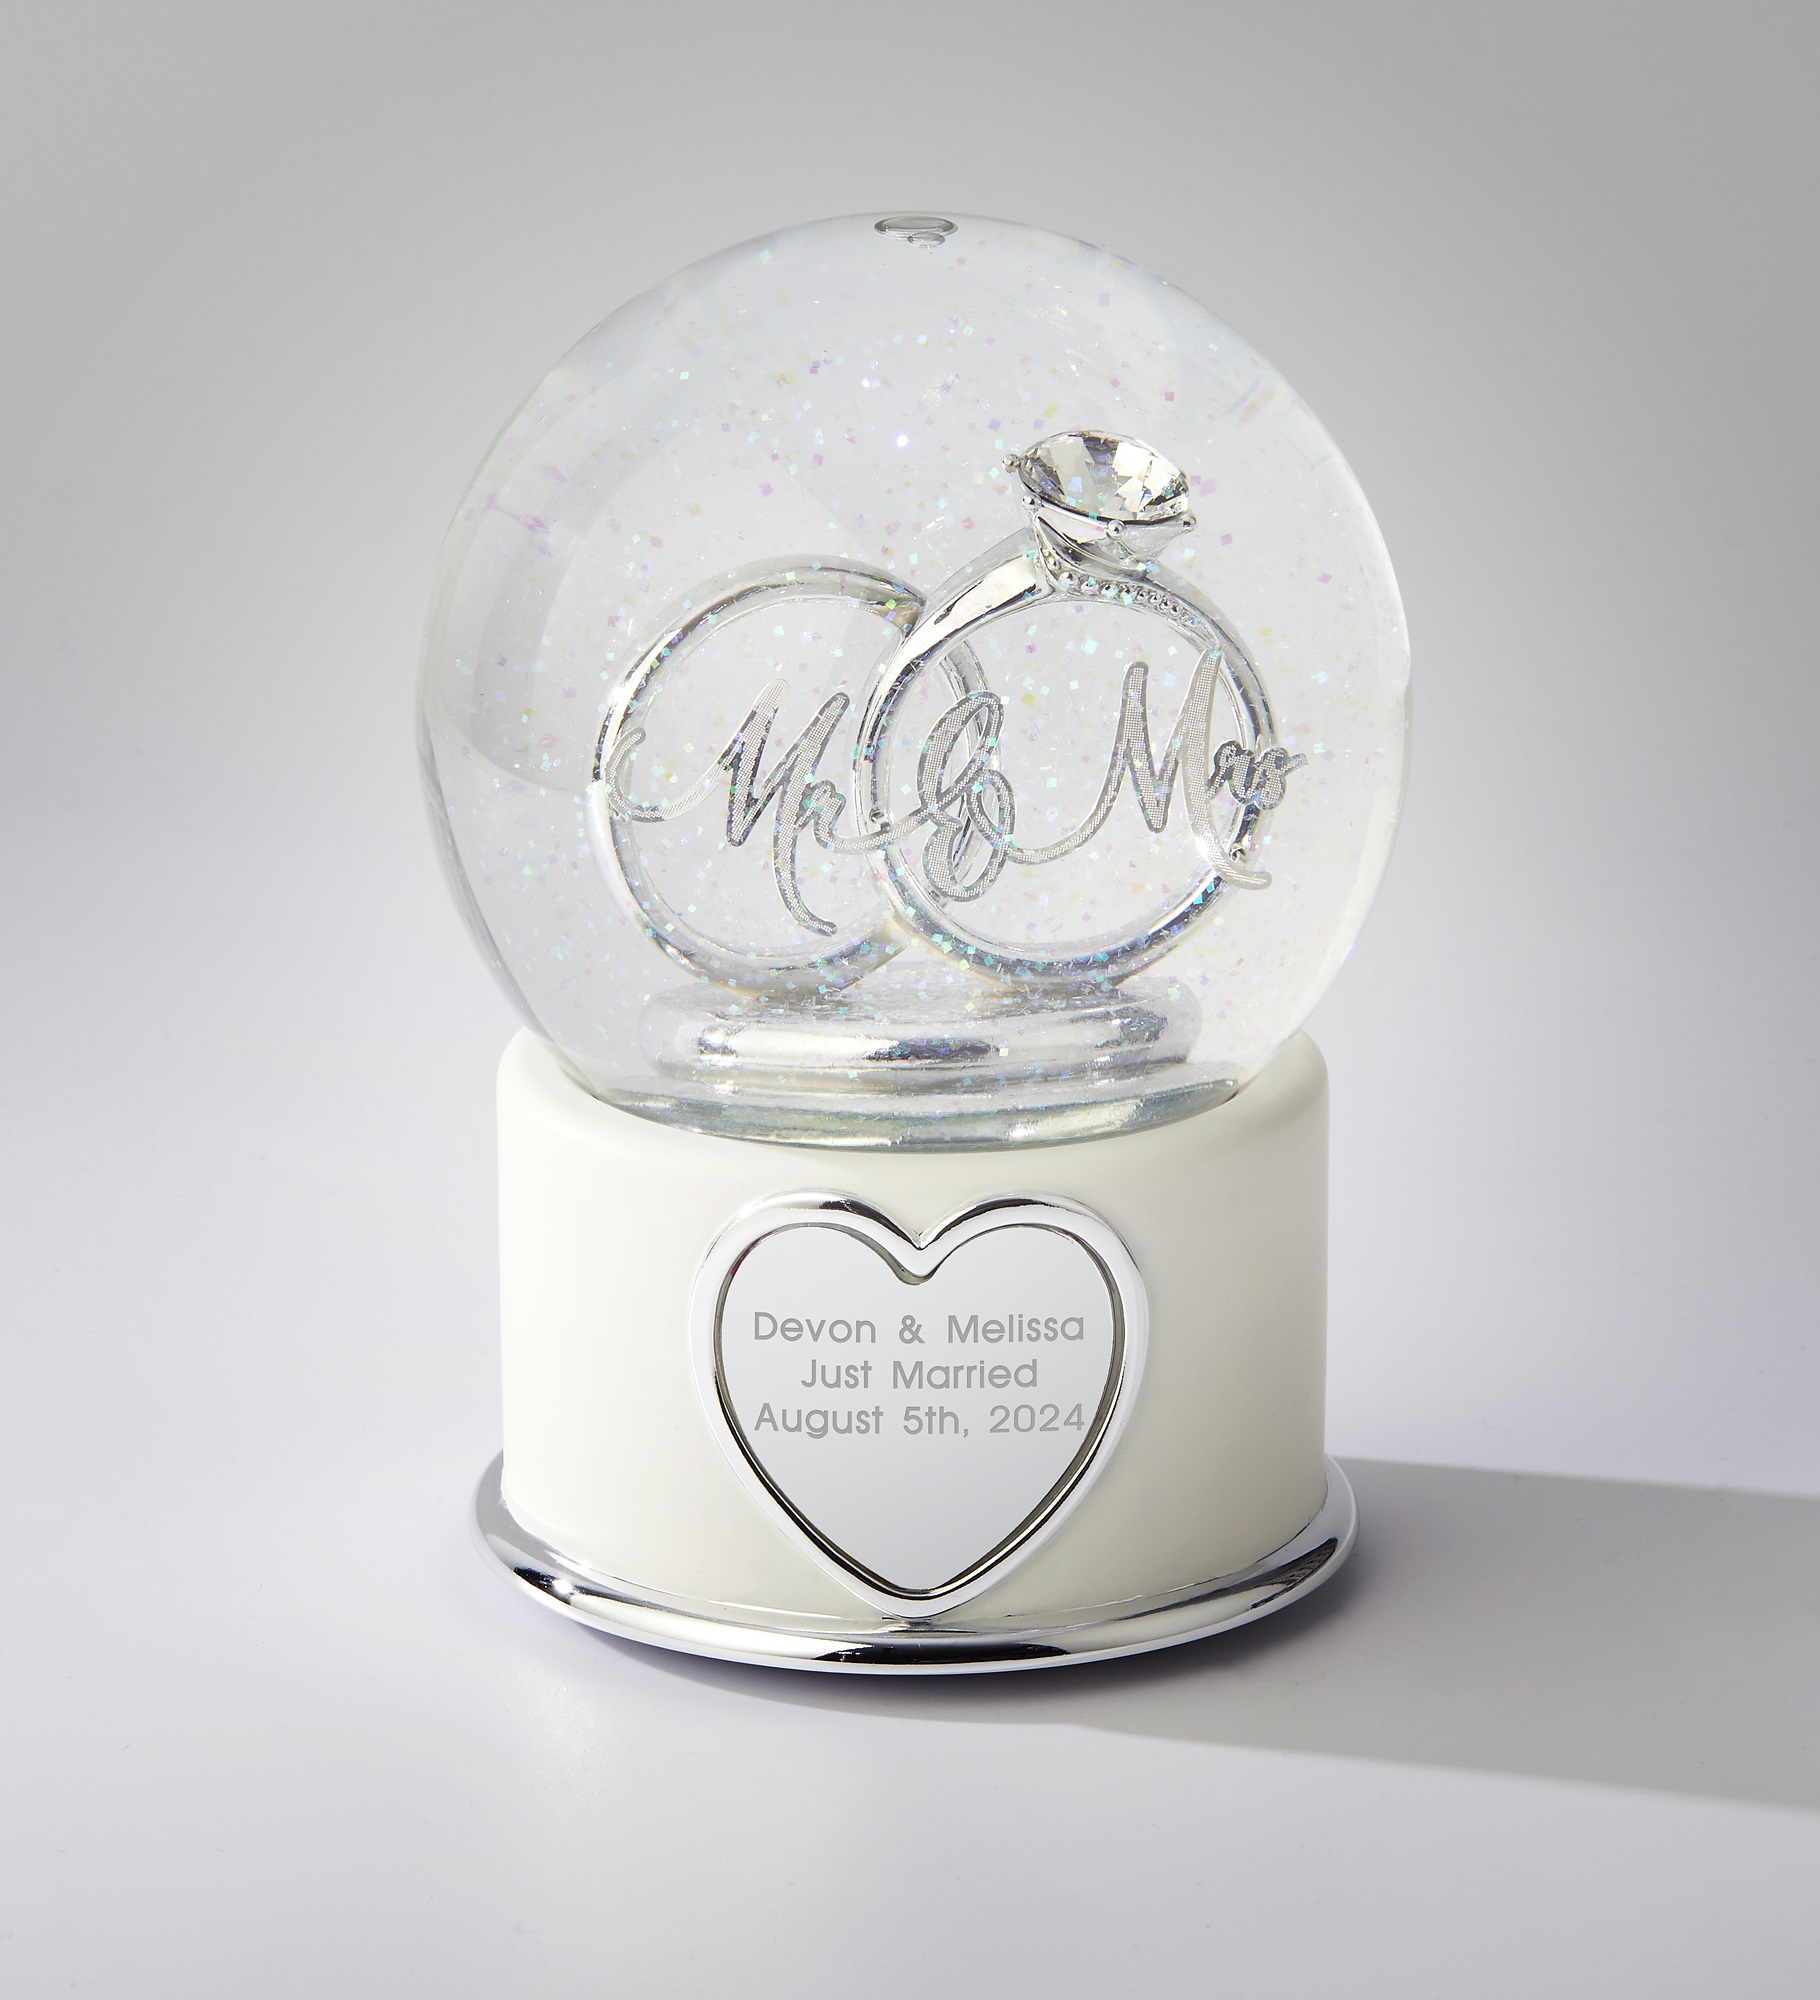  Mr. and Mrs. Wedding Ring Engraved Snow Globe